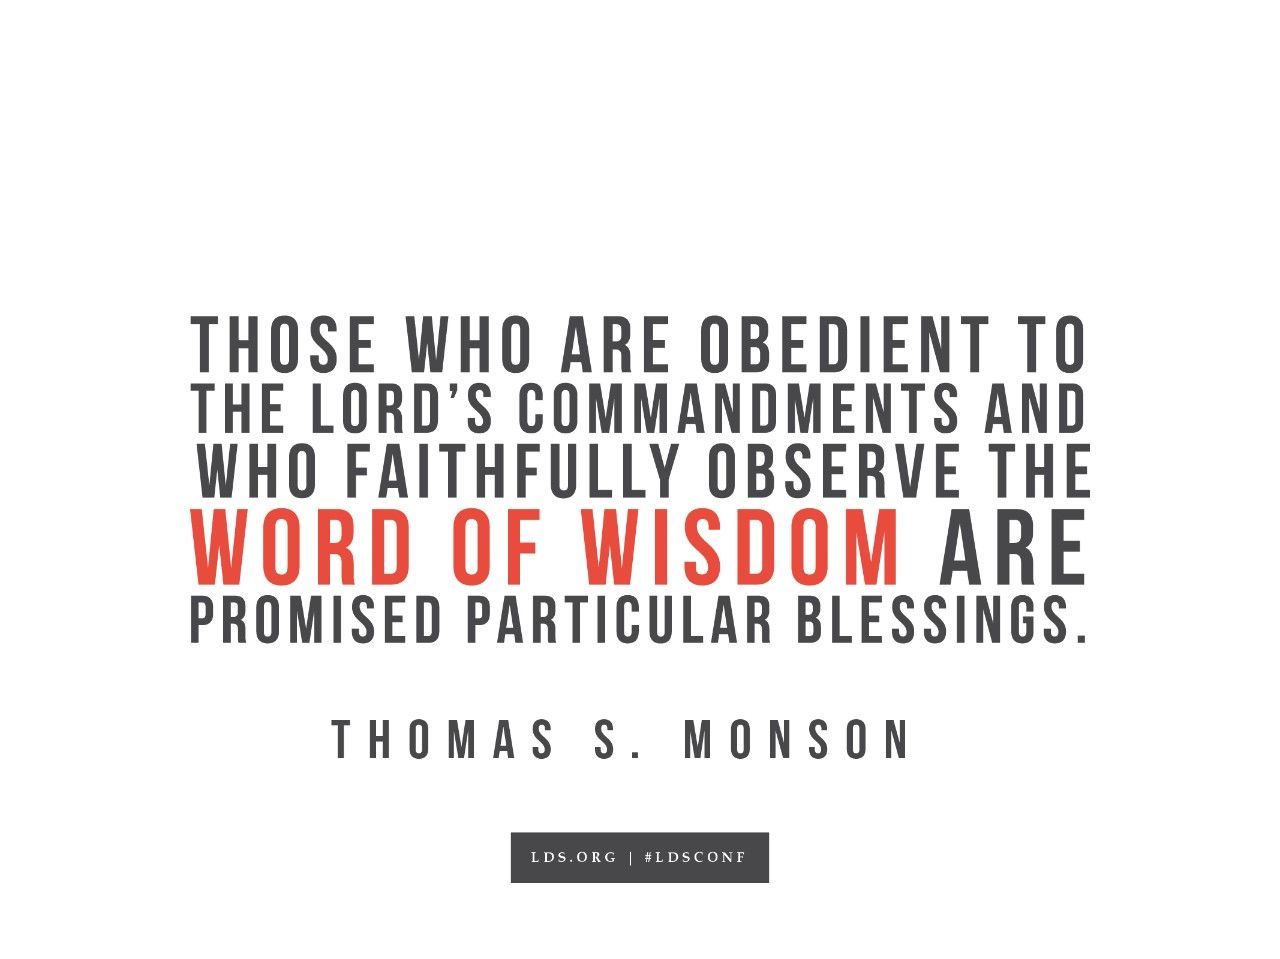 “Those who are obedient to the Lord’s commandments and who faithfully observe the Word of Wisdom are promised particular blessings.”—Thomas S. Monson, “Principles and Promises”